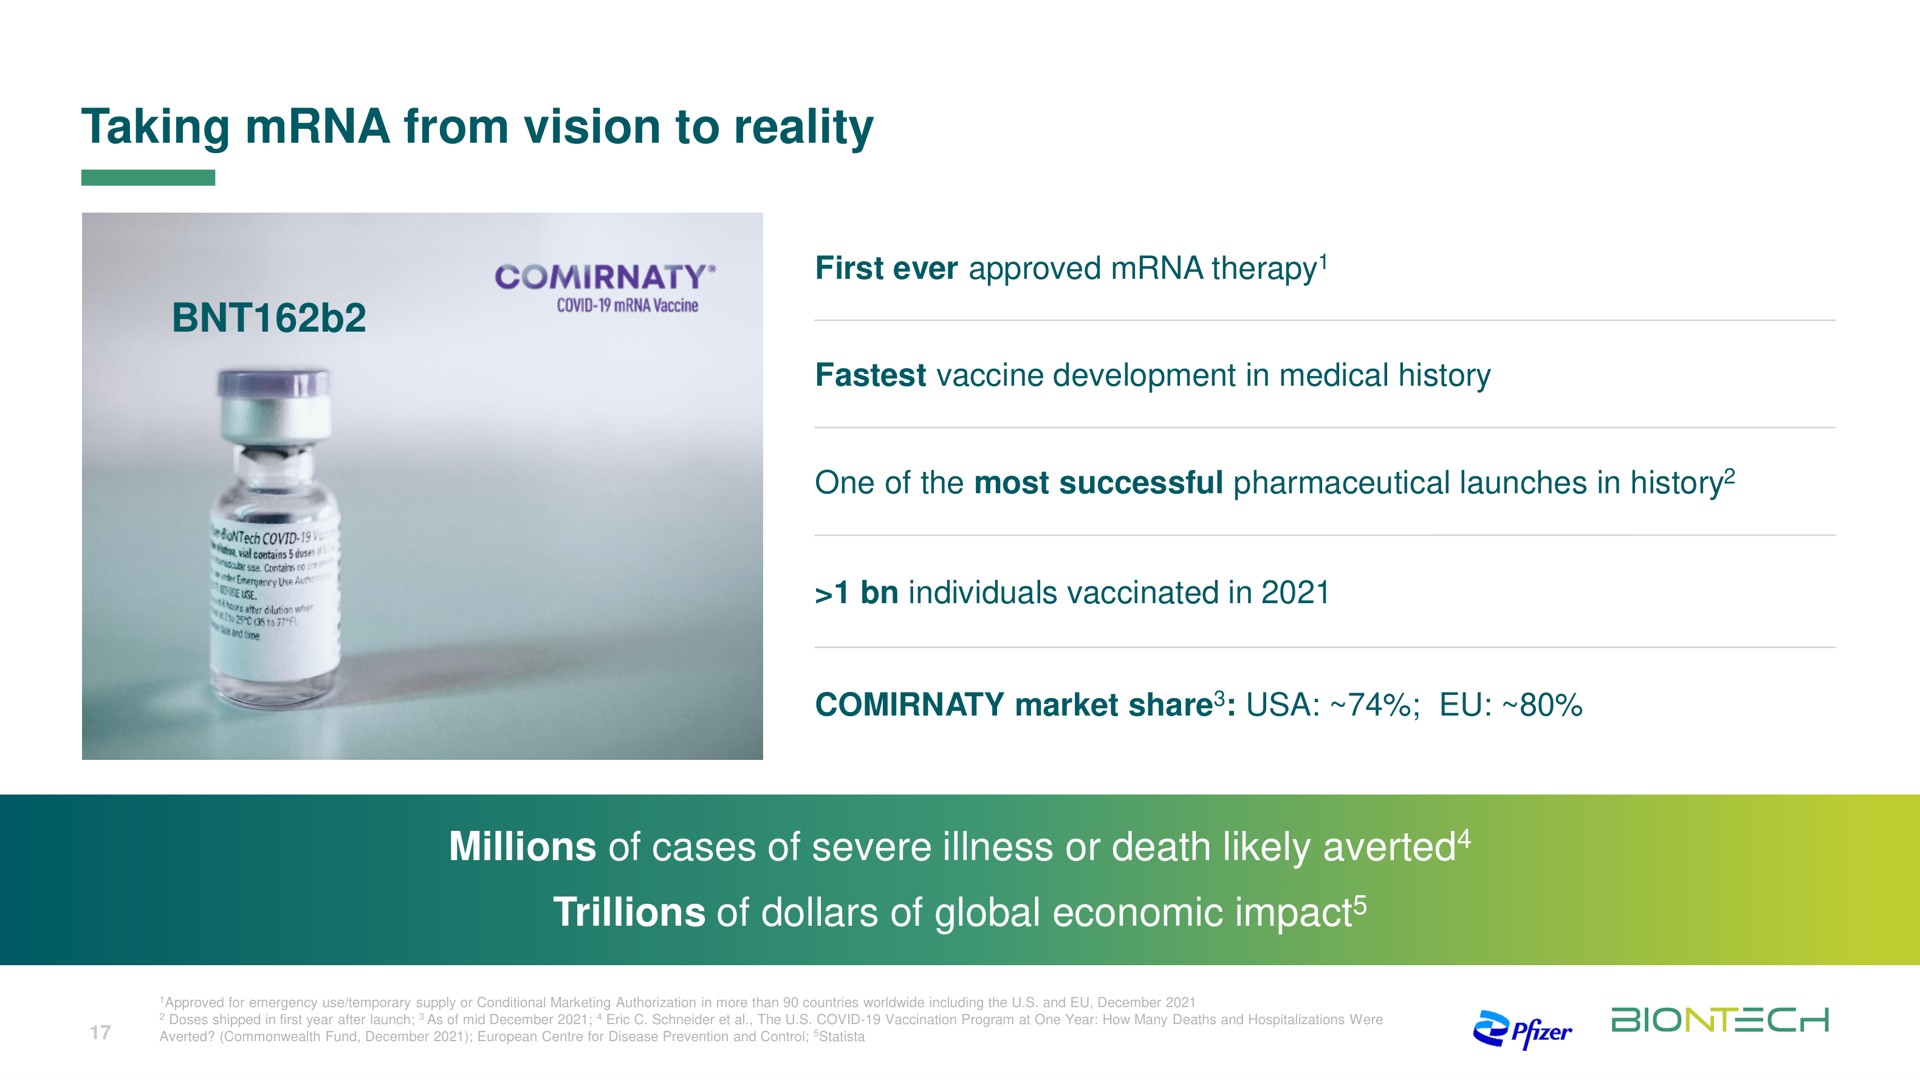 taking from vision to reality first ever approved therapy millions of cases of severe illness or death likely averted trillions of dollars of global economic impact | BioNTech